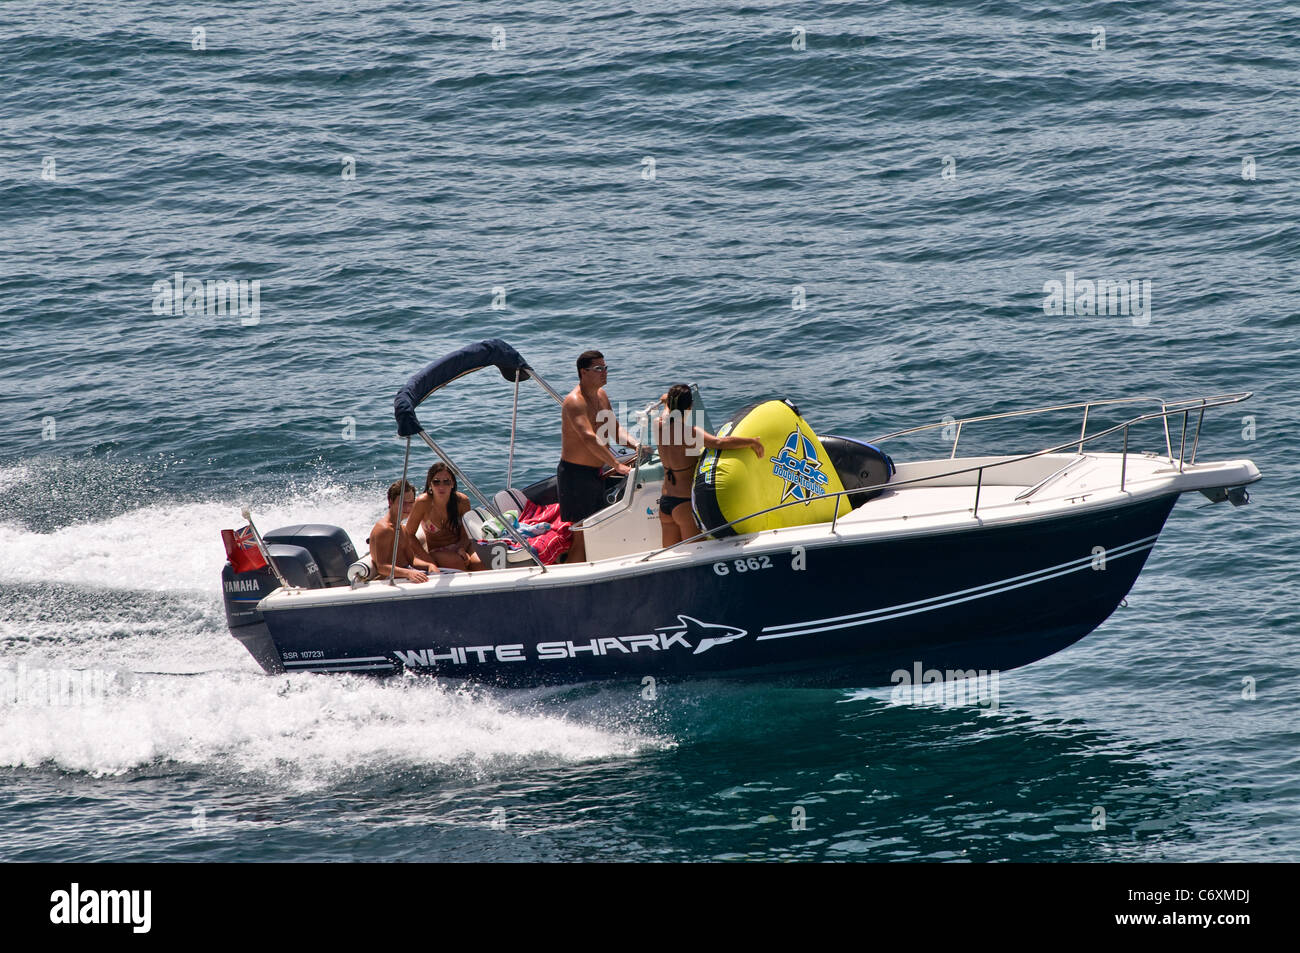 Small boat, pleasure craft 'The White Shark', Yamaha 100HP twin outboard engines. Stock Photo